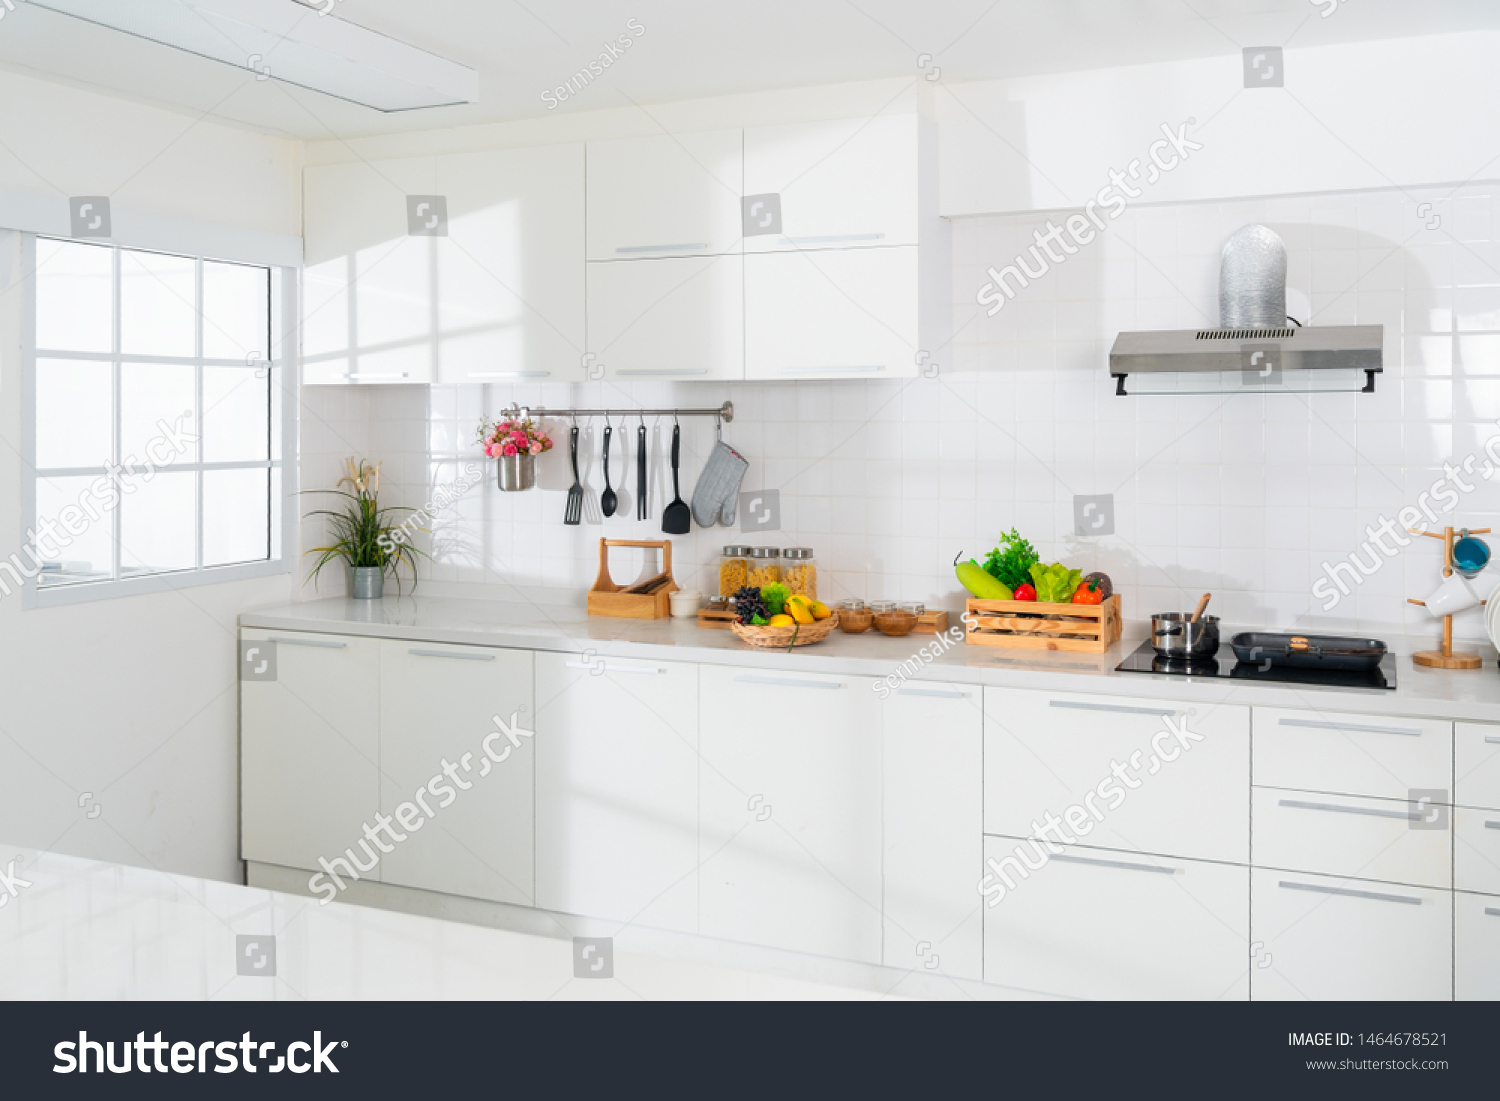 Modern white kitchen with counter and white details, minimalist interior, Full set of kitchen equipment, pan, pot, electric hob, flipper, vegetable, fruit. #1464678521